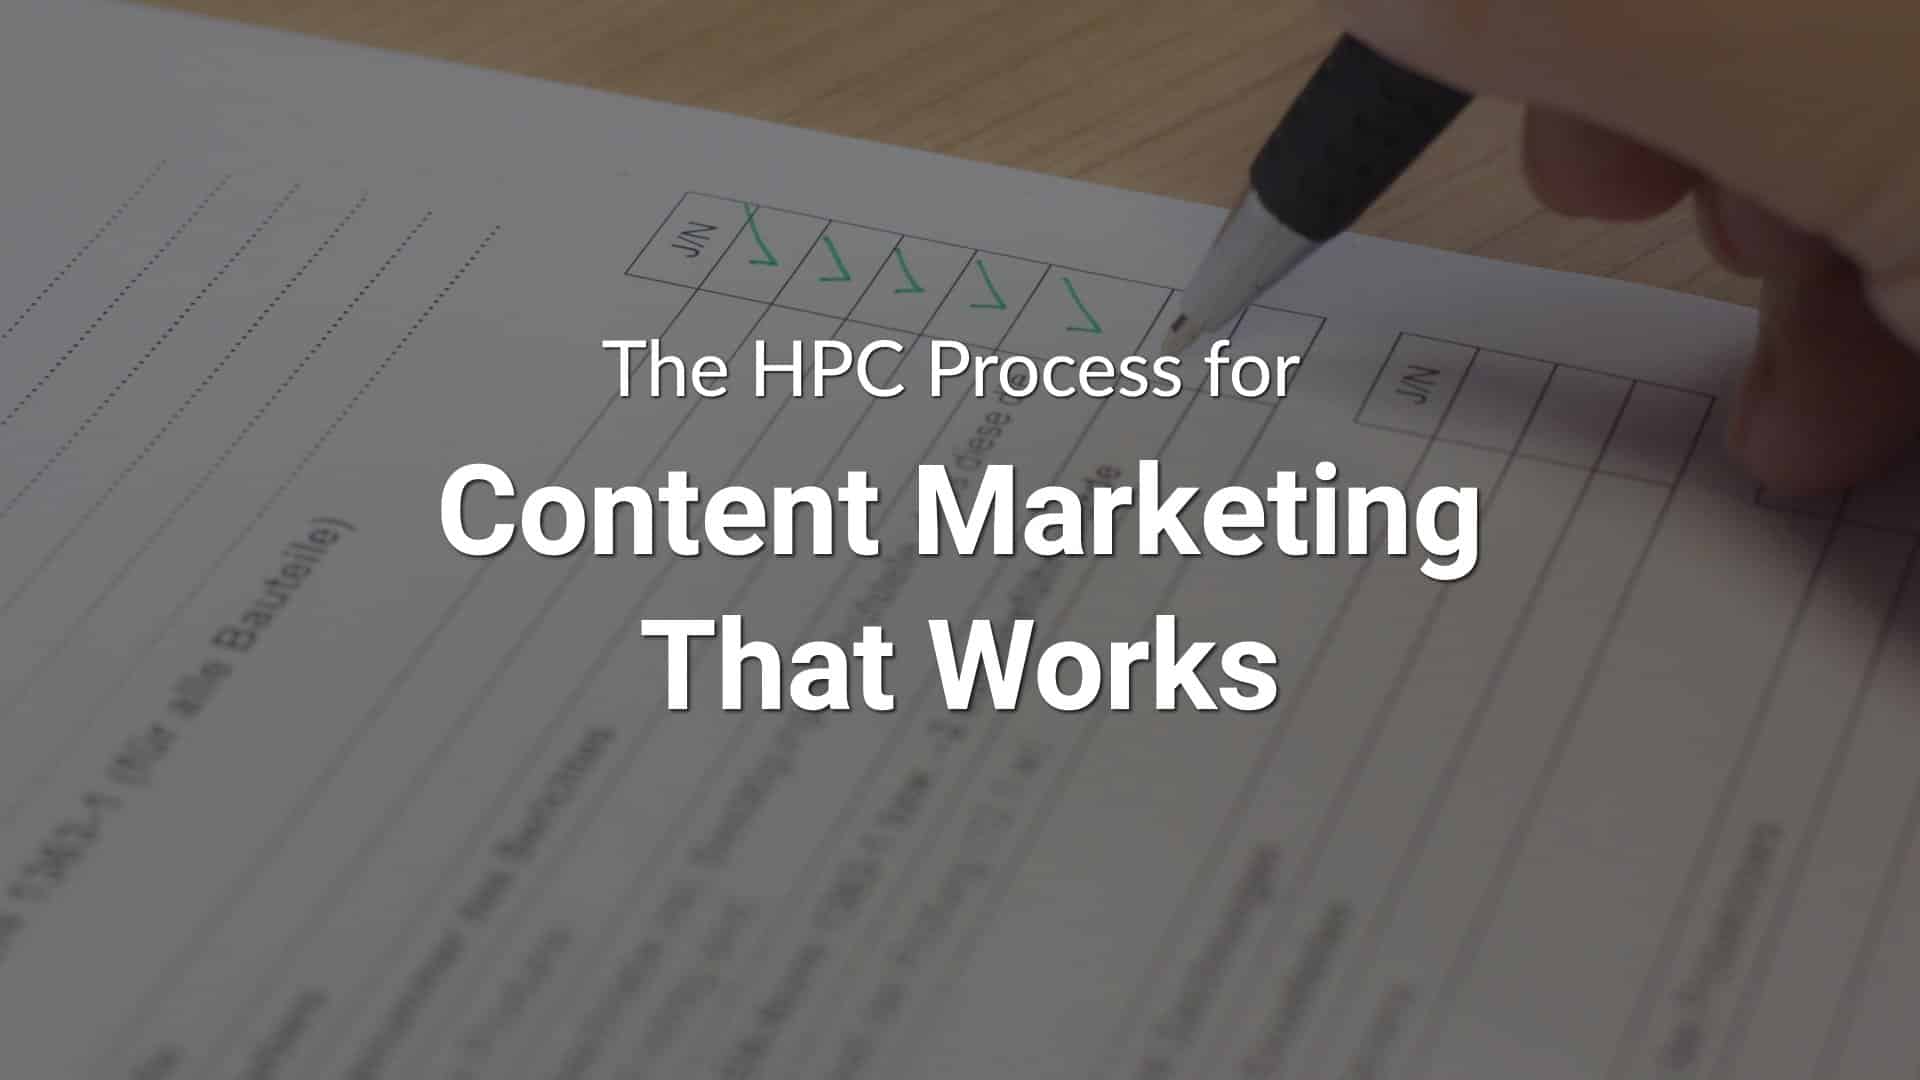 Content Marketing That Works